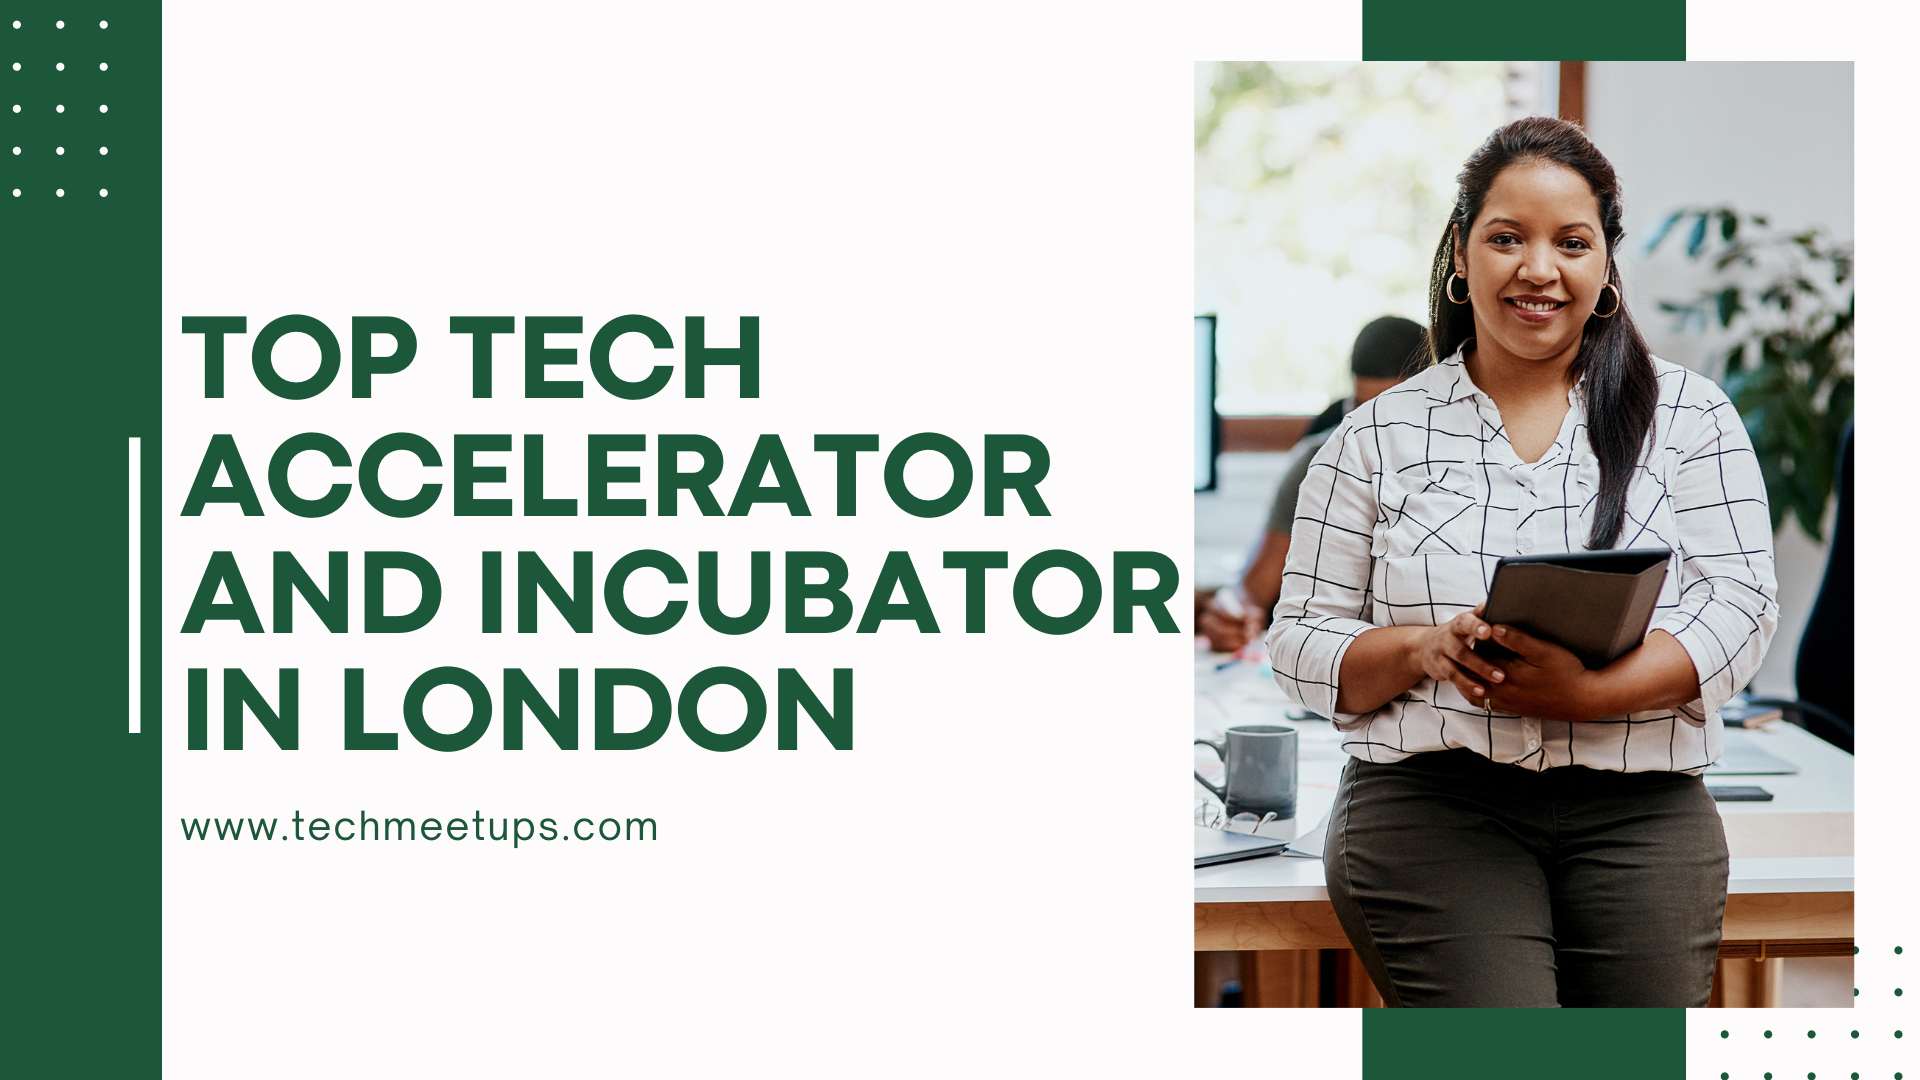 Supercharge Your Startup: Spotlight on London’s Top Tech Accelerator and Incubator